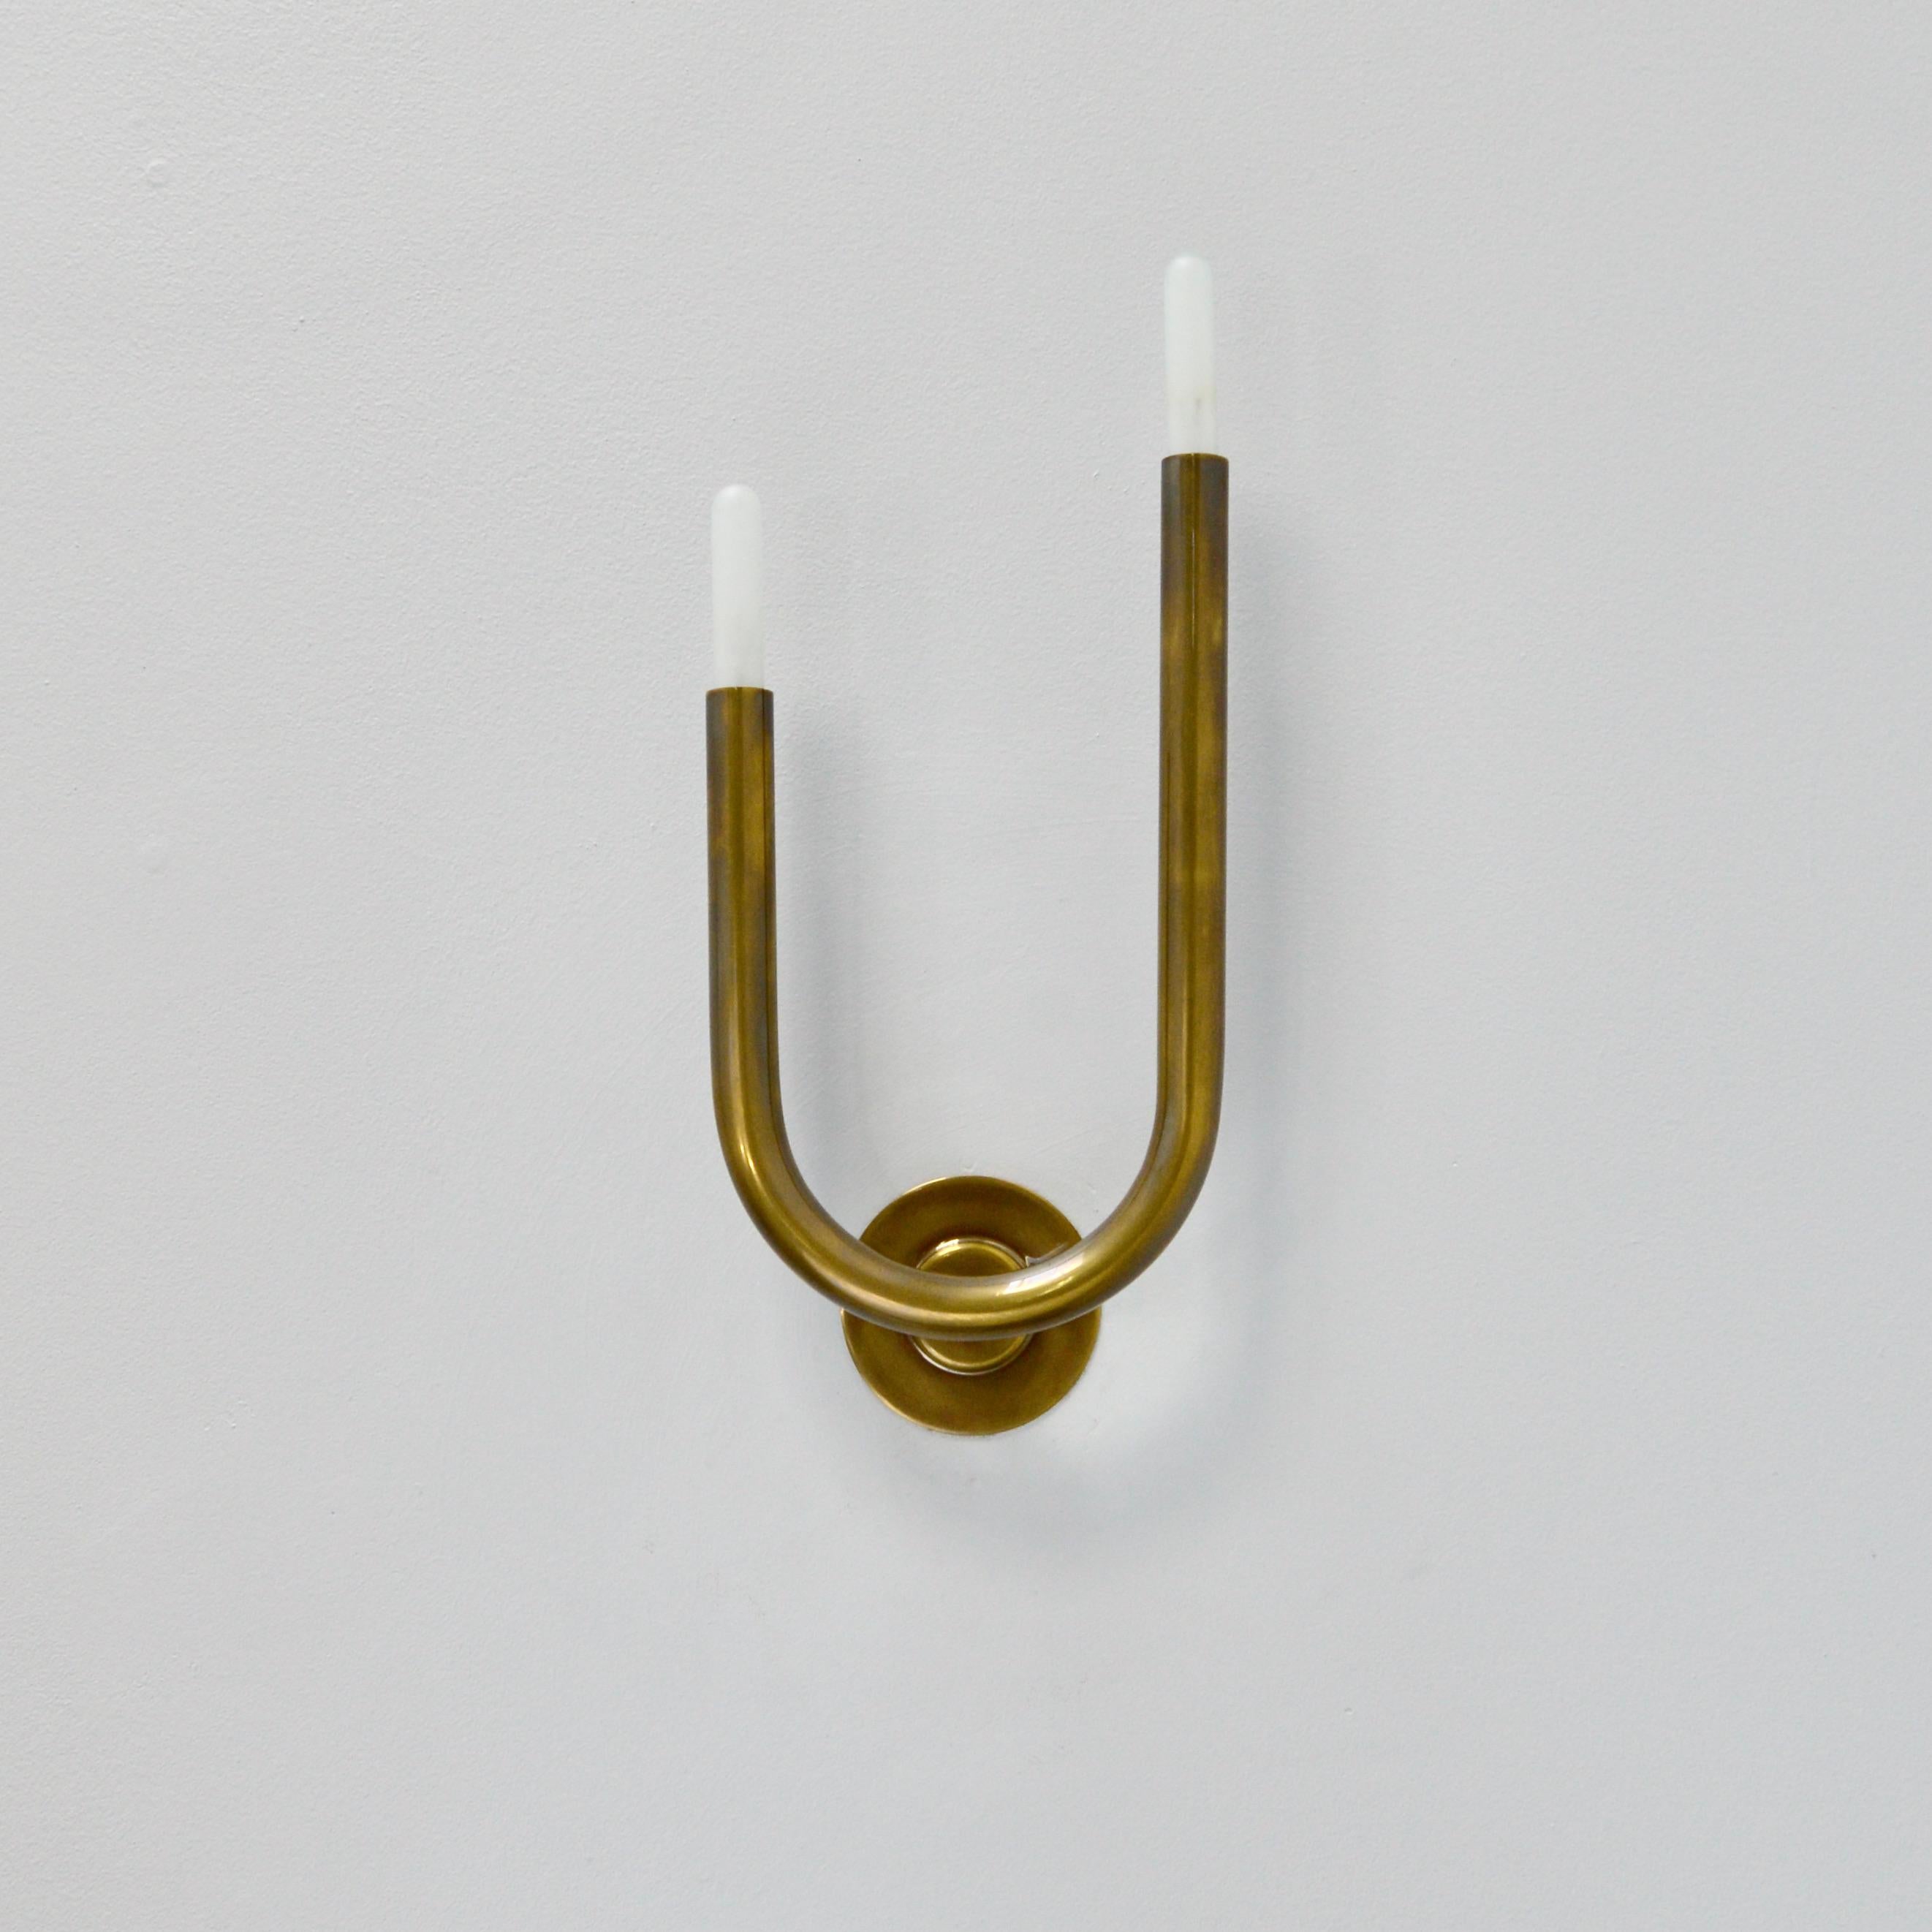 Superb and sleek modern LU Wall sconces by Lumfardo Luminaires in patinated un-lacquered brass. Candelabra based sockets. Lightbulbs included. Priced as a pair. (left and right sconces)

Measurements are with bulbs.